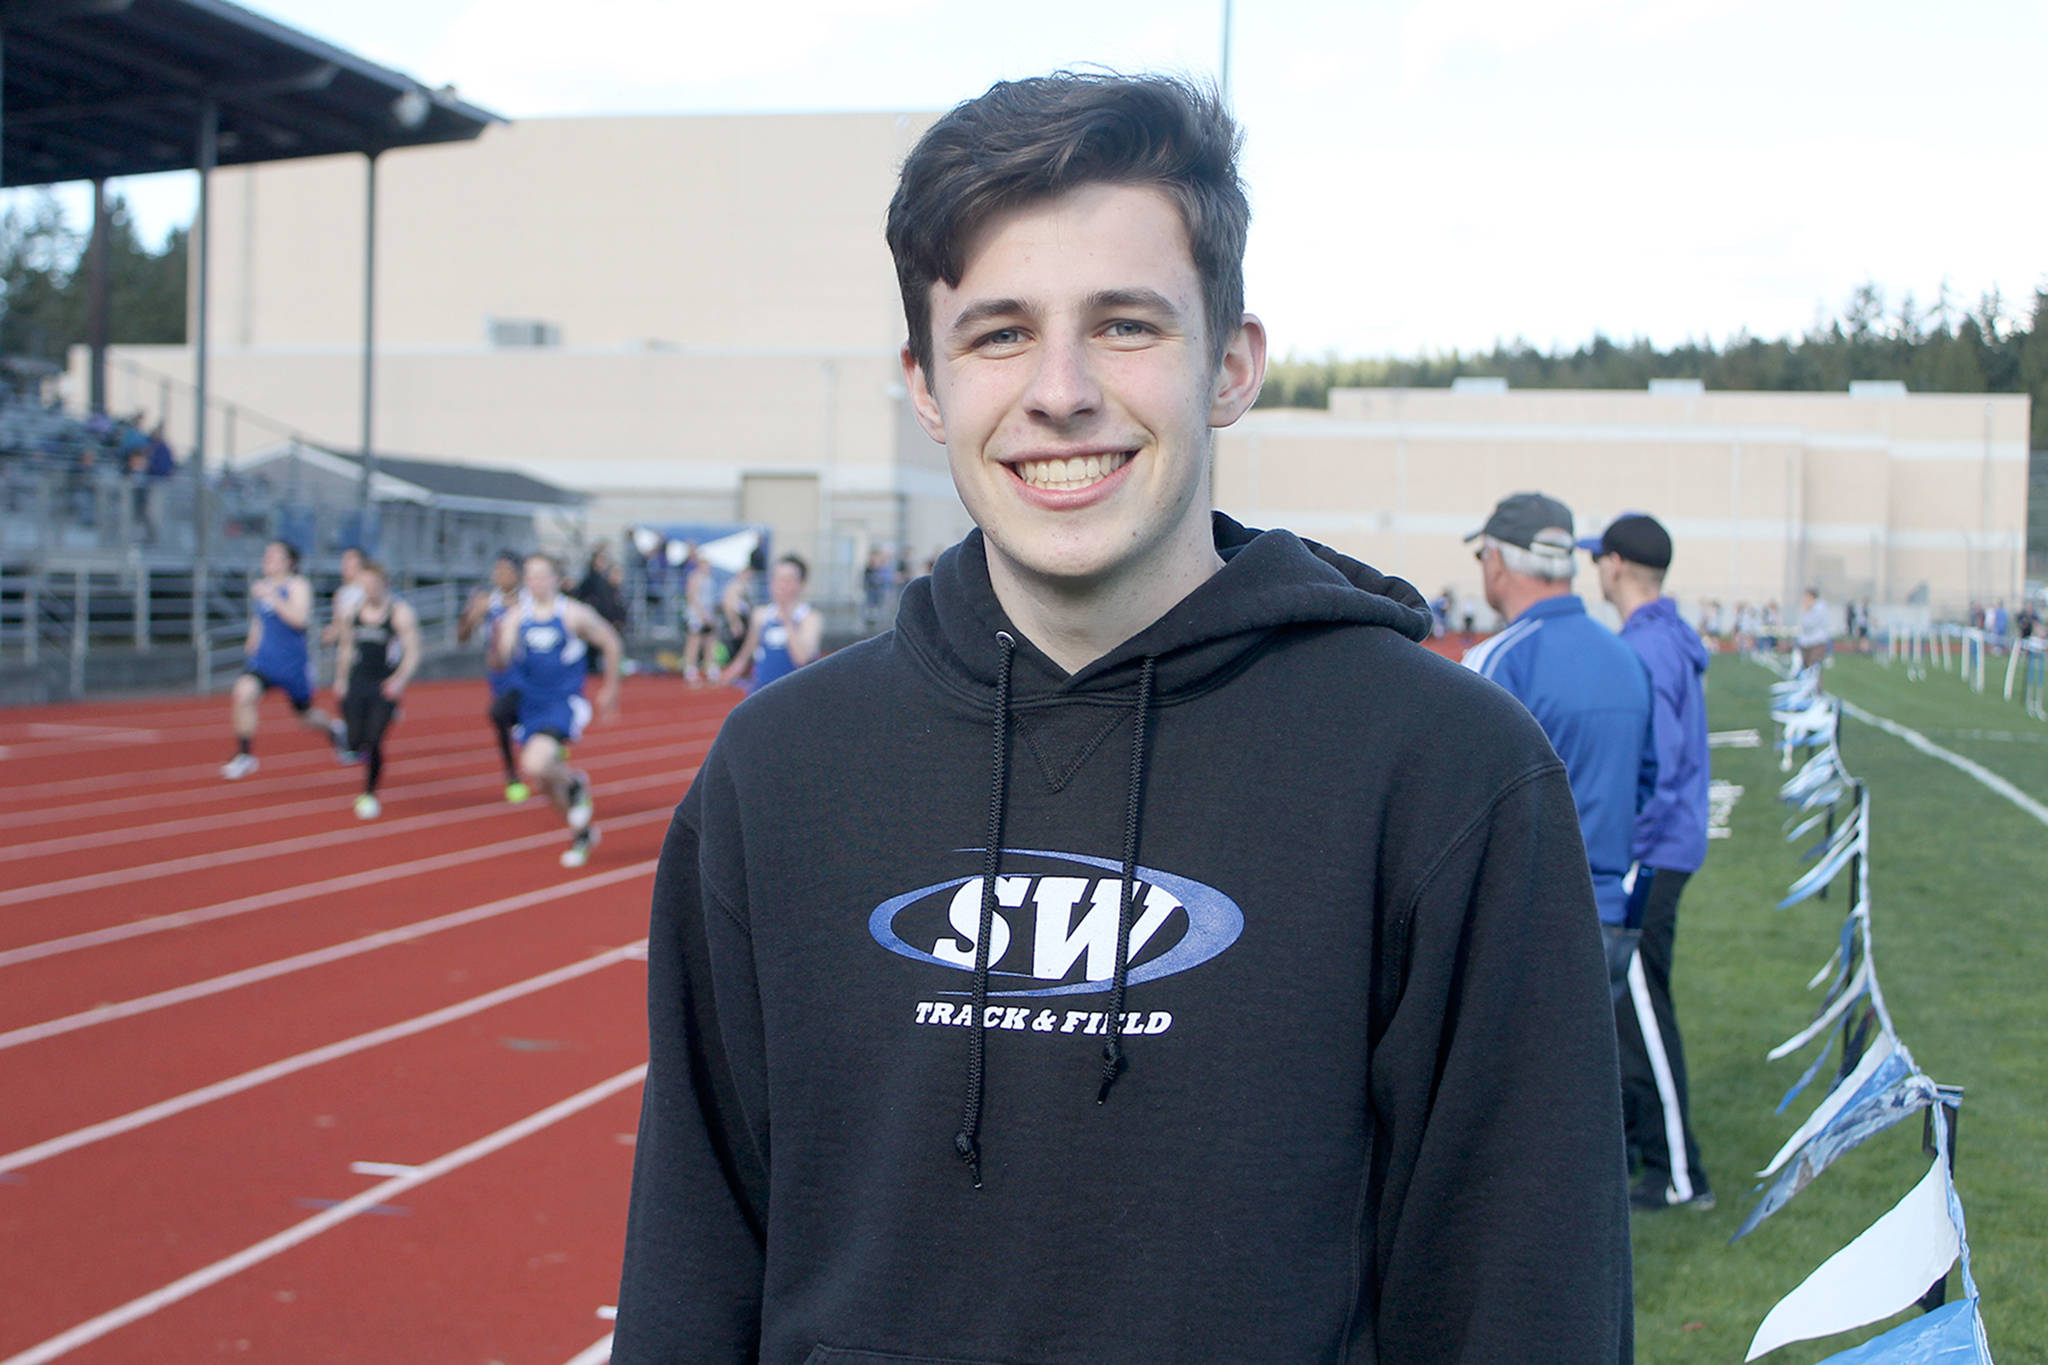 SWHS senior uses his passions for the good of others